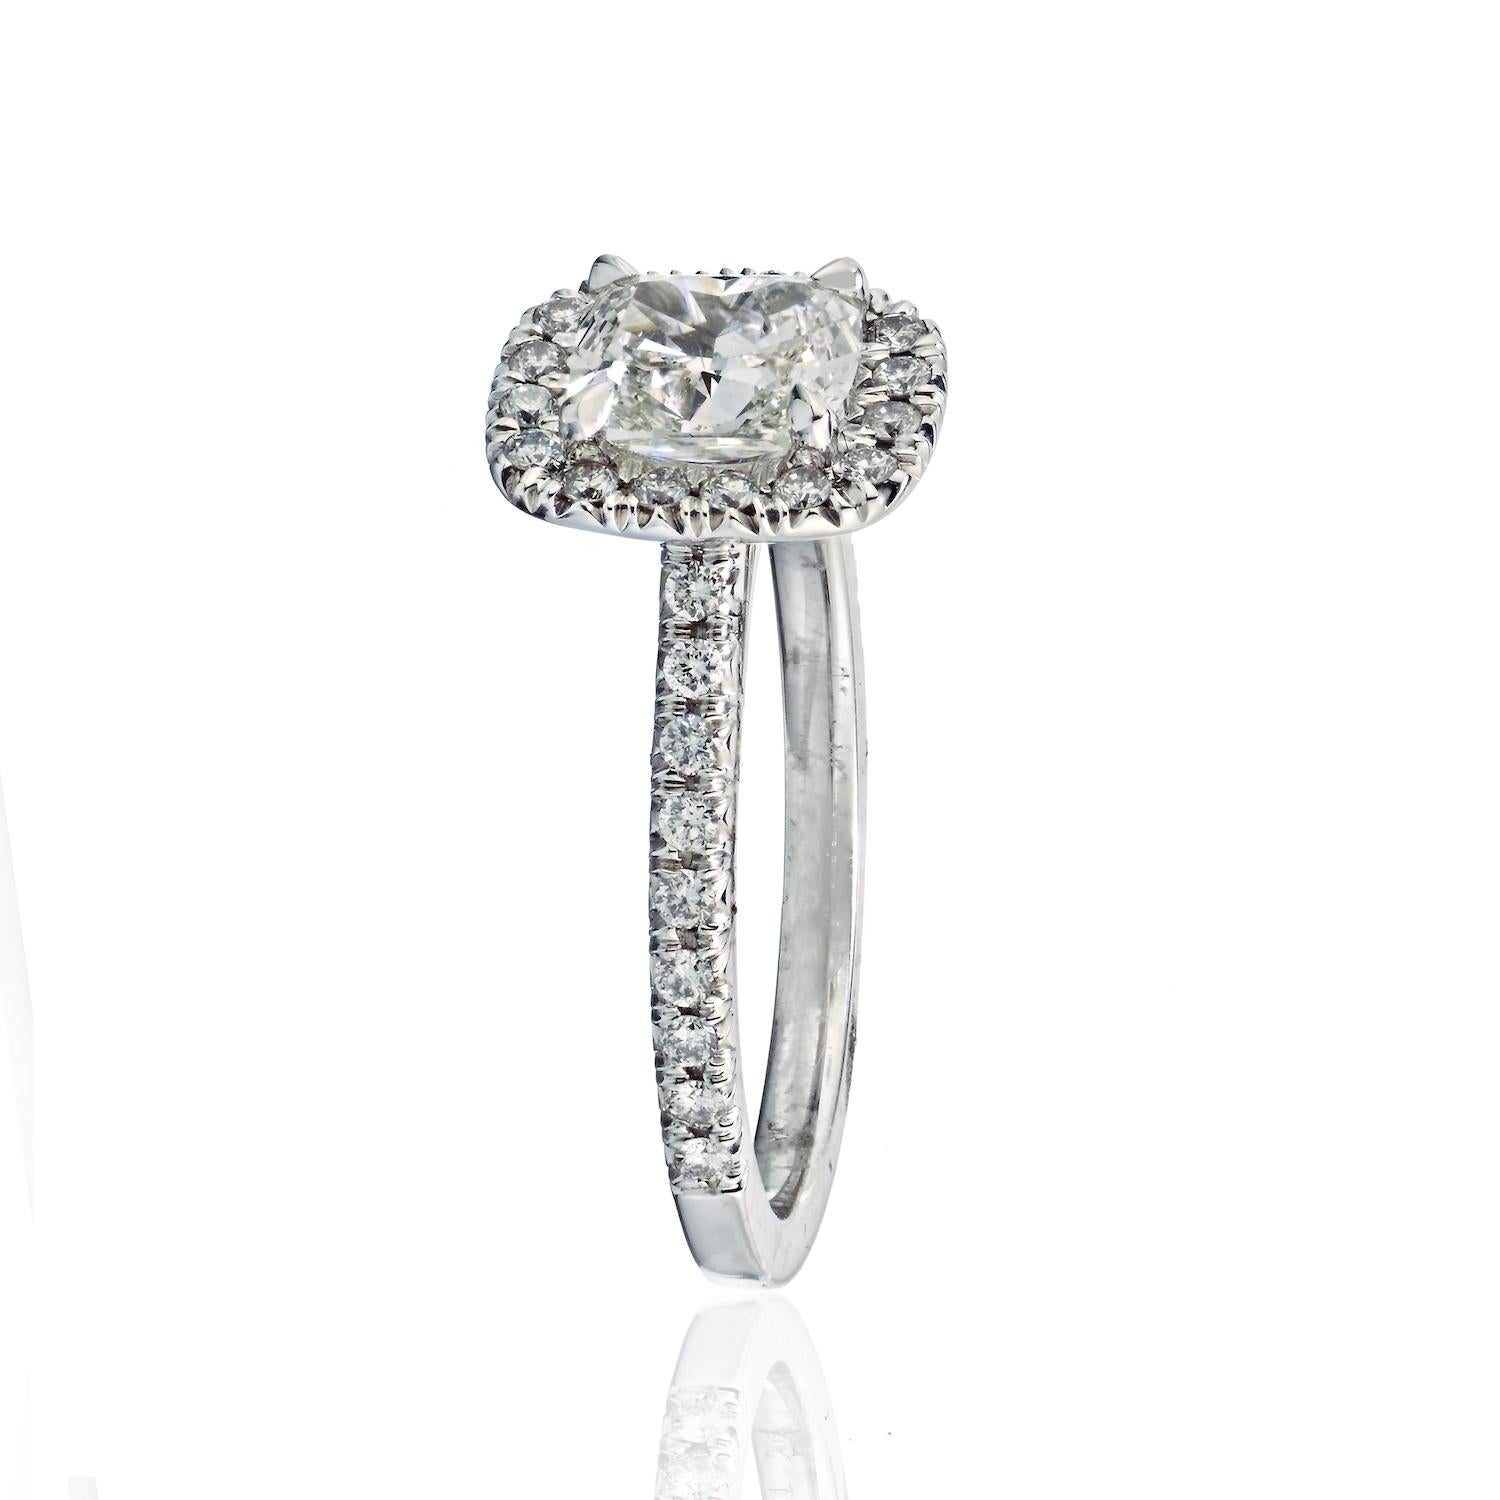 Engagement Cushion Cut Diamond Halo Ring 18K White Gold 1.06Cttw In New Condition For Sale In New York, NY